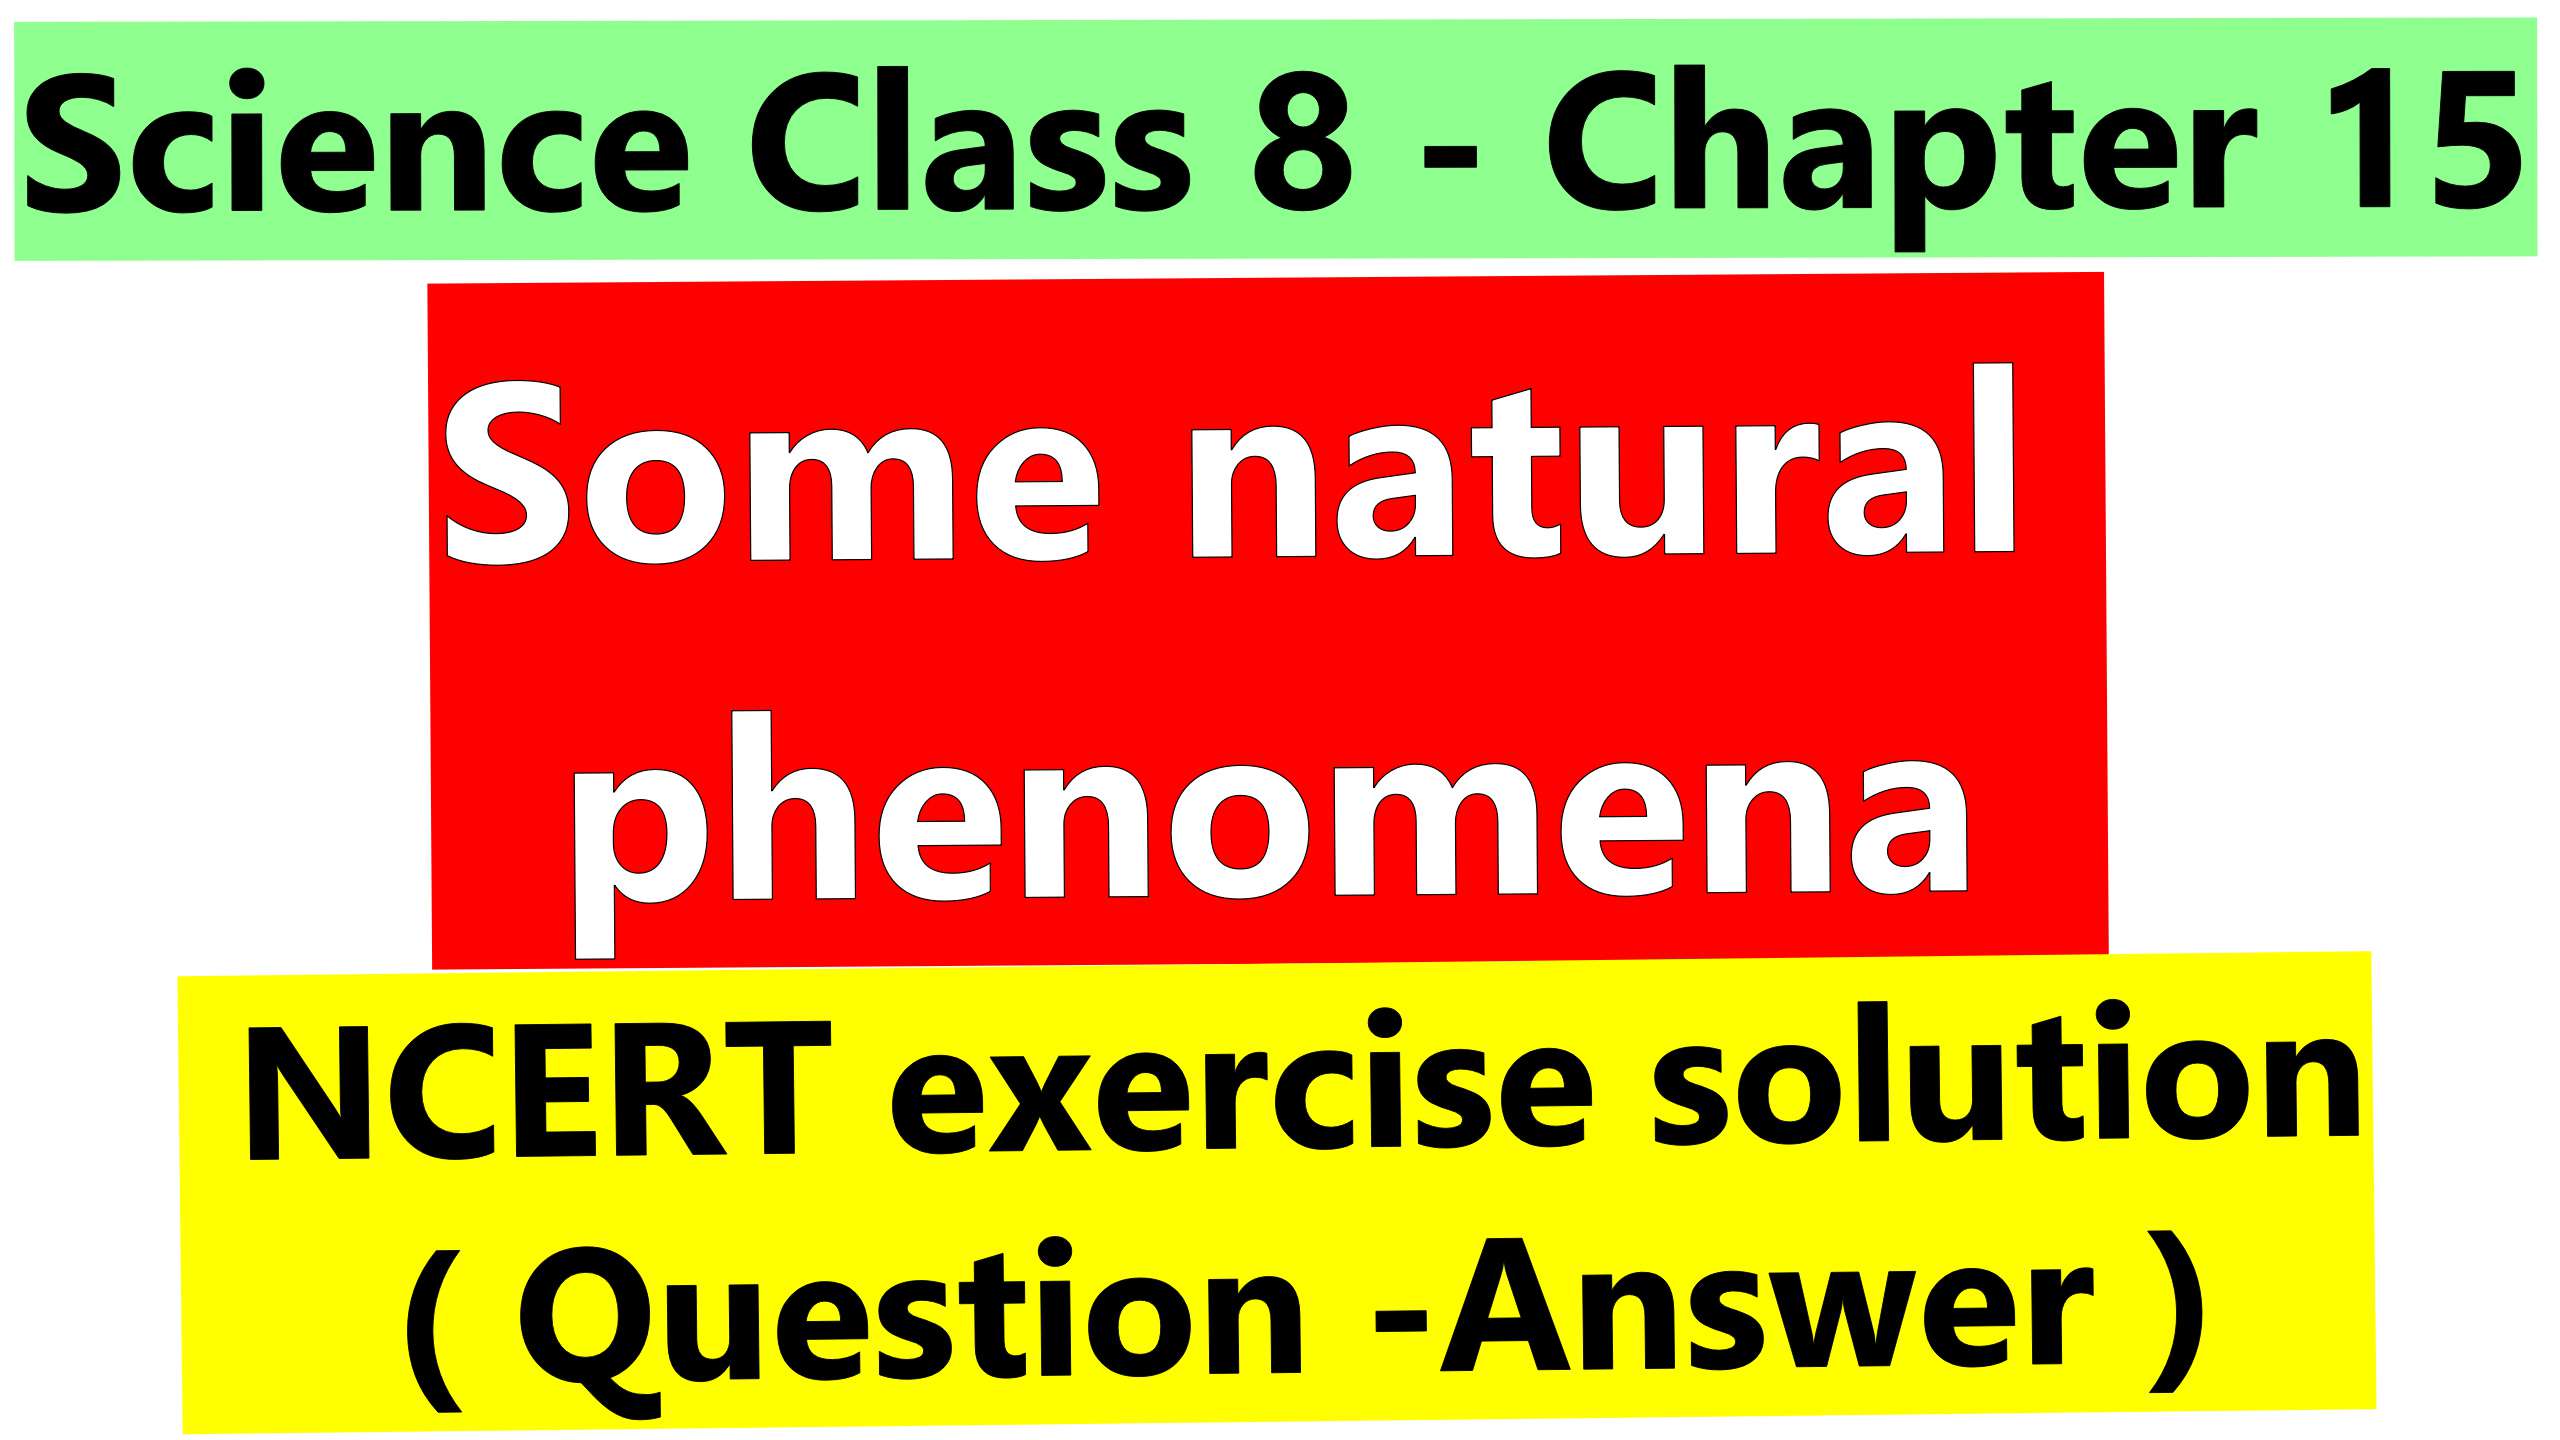 Science Class 8 - Chapter 15- Some natural phenomena- NCERT exercise solution (Question-Answer)